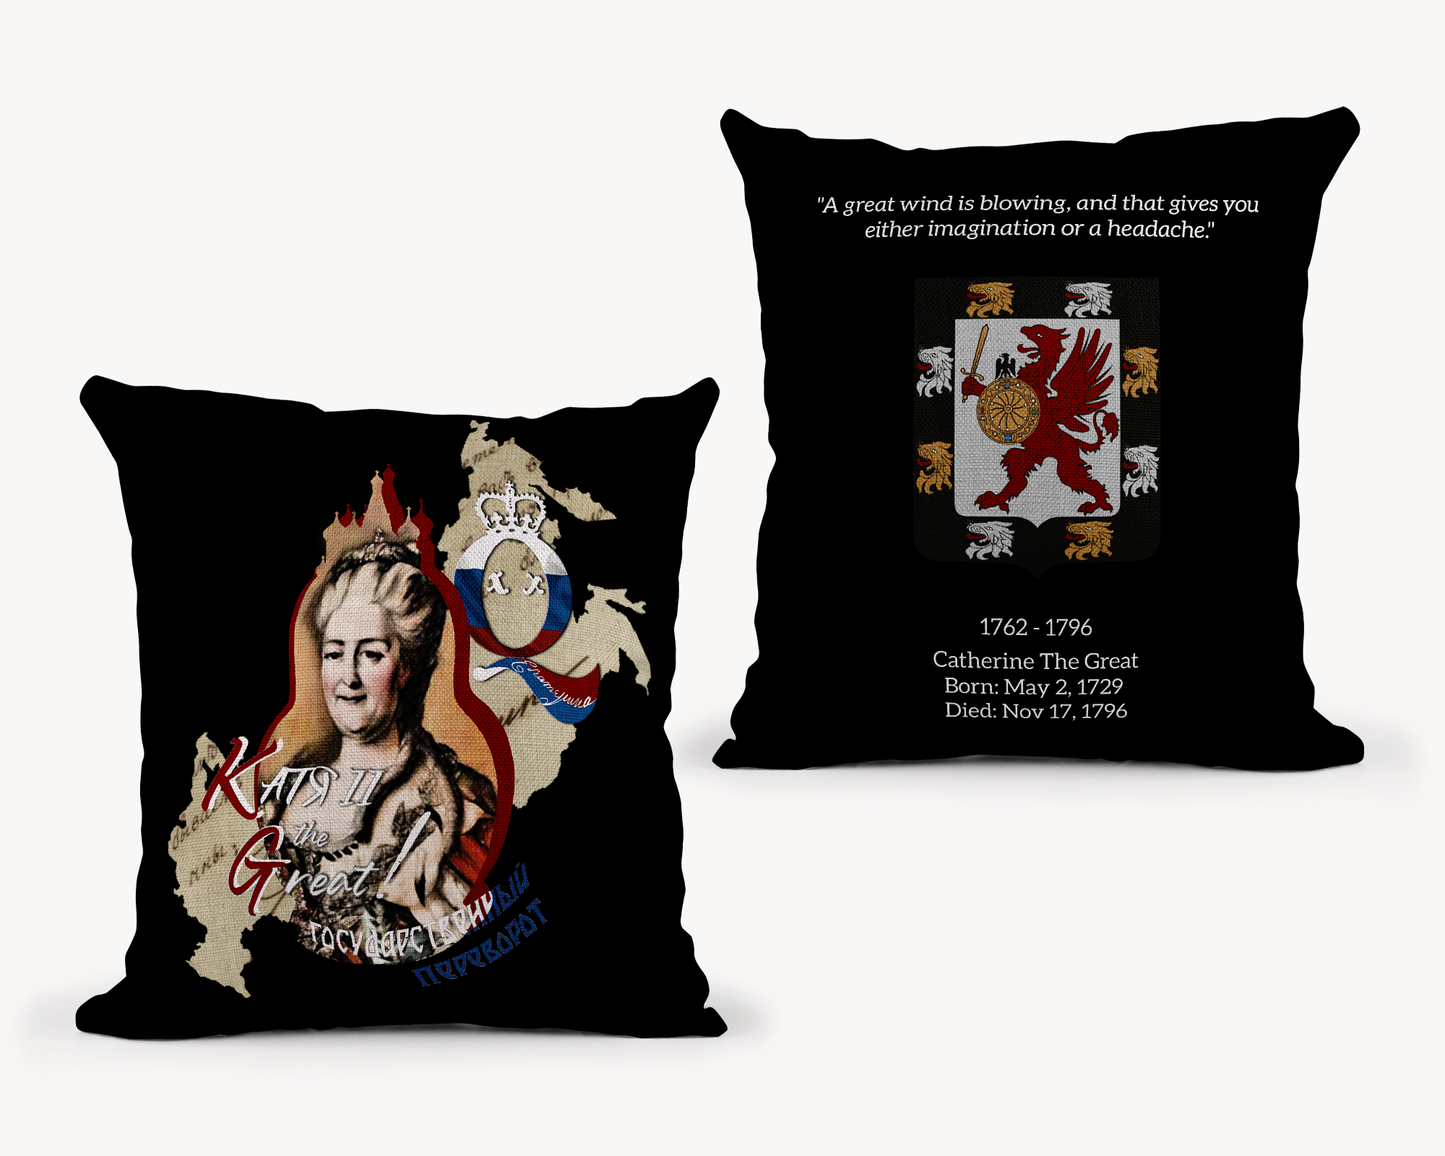 Catherine The Great Black Pillow 18x18